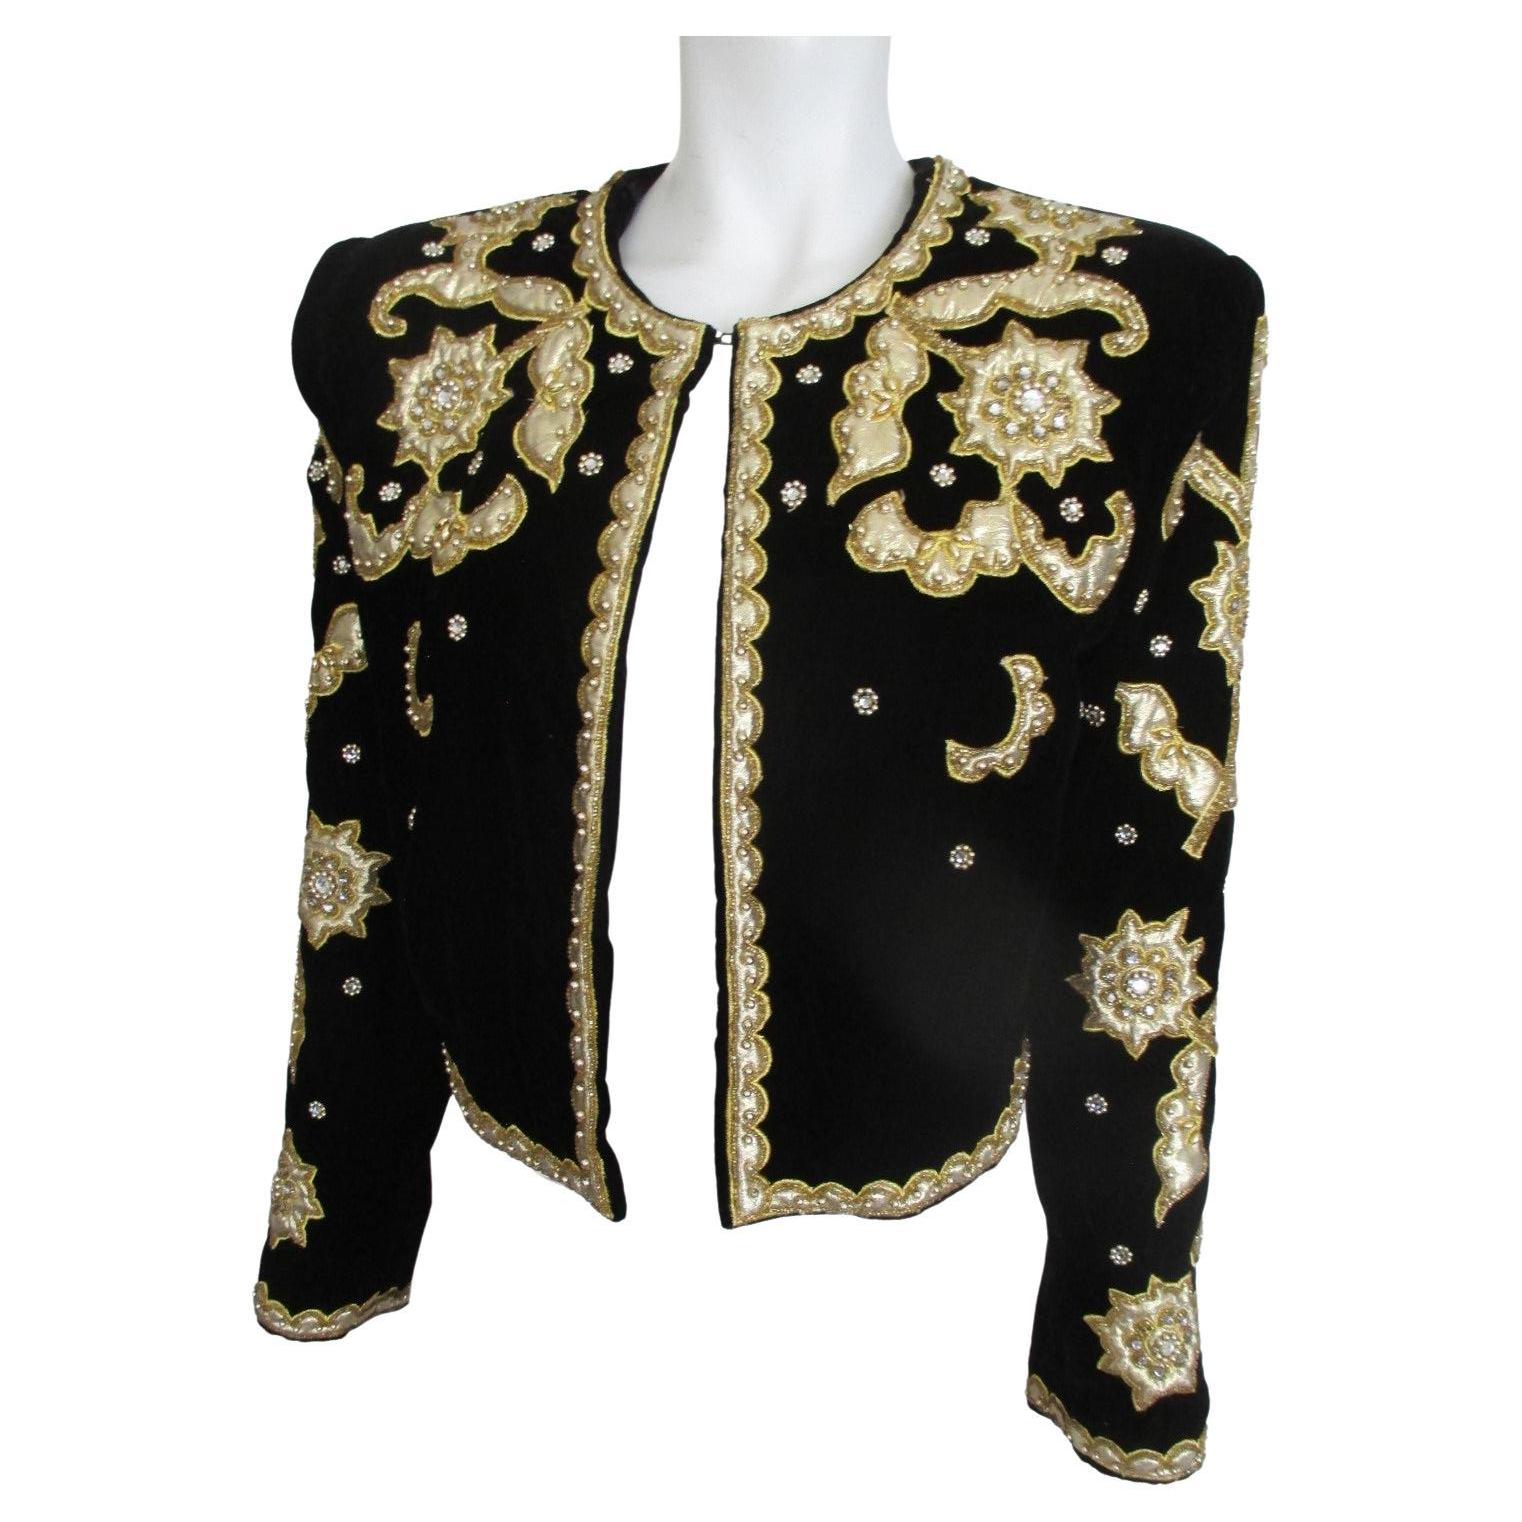 Exclusive Black Velvet and Gold Embroidered Bolero/Jacket